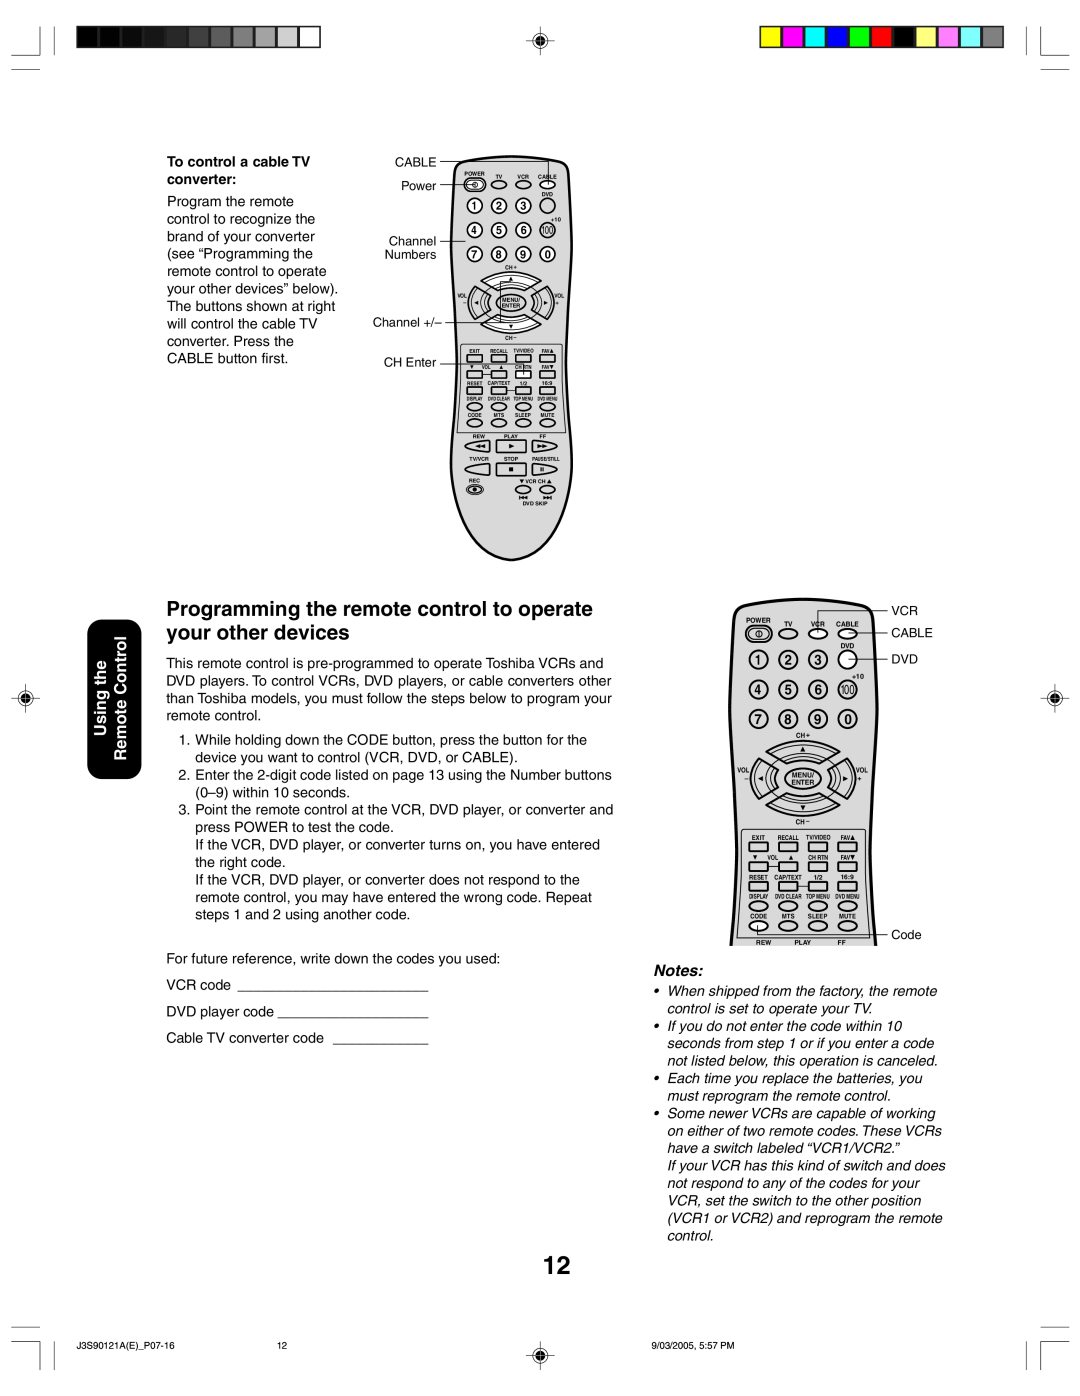 Toshiba 32AF45 appendix Programming the remote control to operate your other devices, Using the Remote Control 